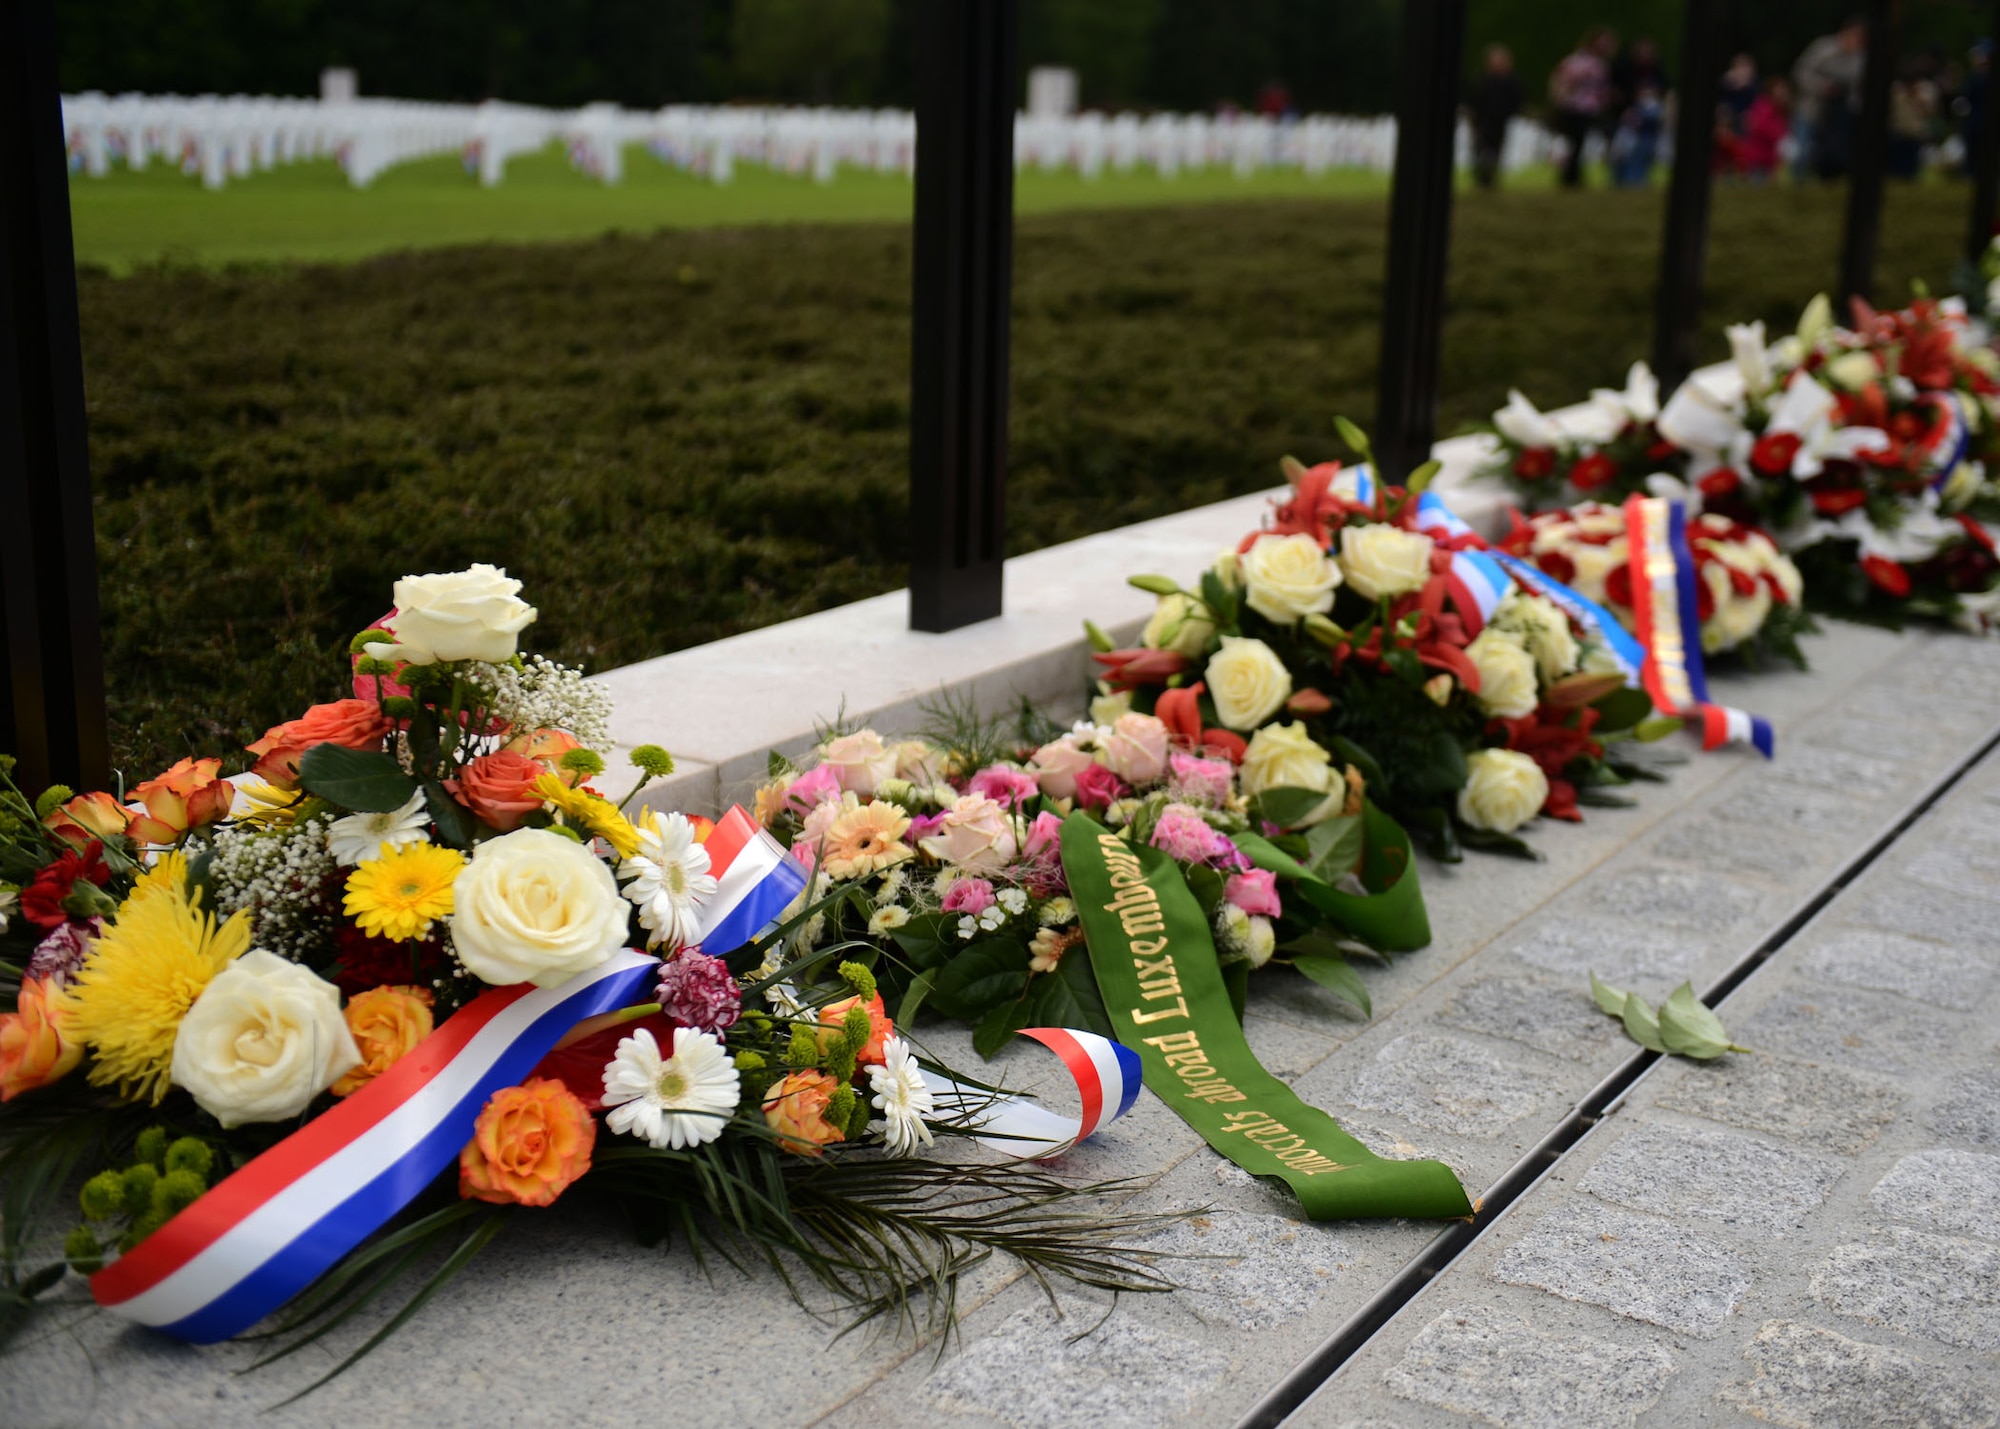 LUXEMBOURG CITY, LUXEMBOURG – Memorial wreaths sit in a line during a Memorial Day commemoration at the Luxembourg American Military Cemetery and Memorial May 25, 2013. Friends and families of loved ones laid flowers in remembrance of the soldiers who died during World War II. (U.S. Air Force photo by Airman 1st Class Gustavo Castillo/Released)